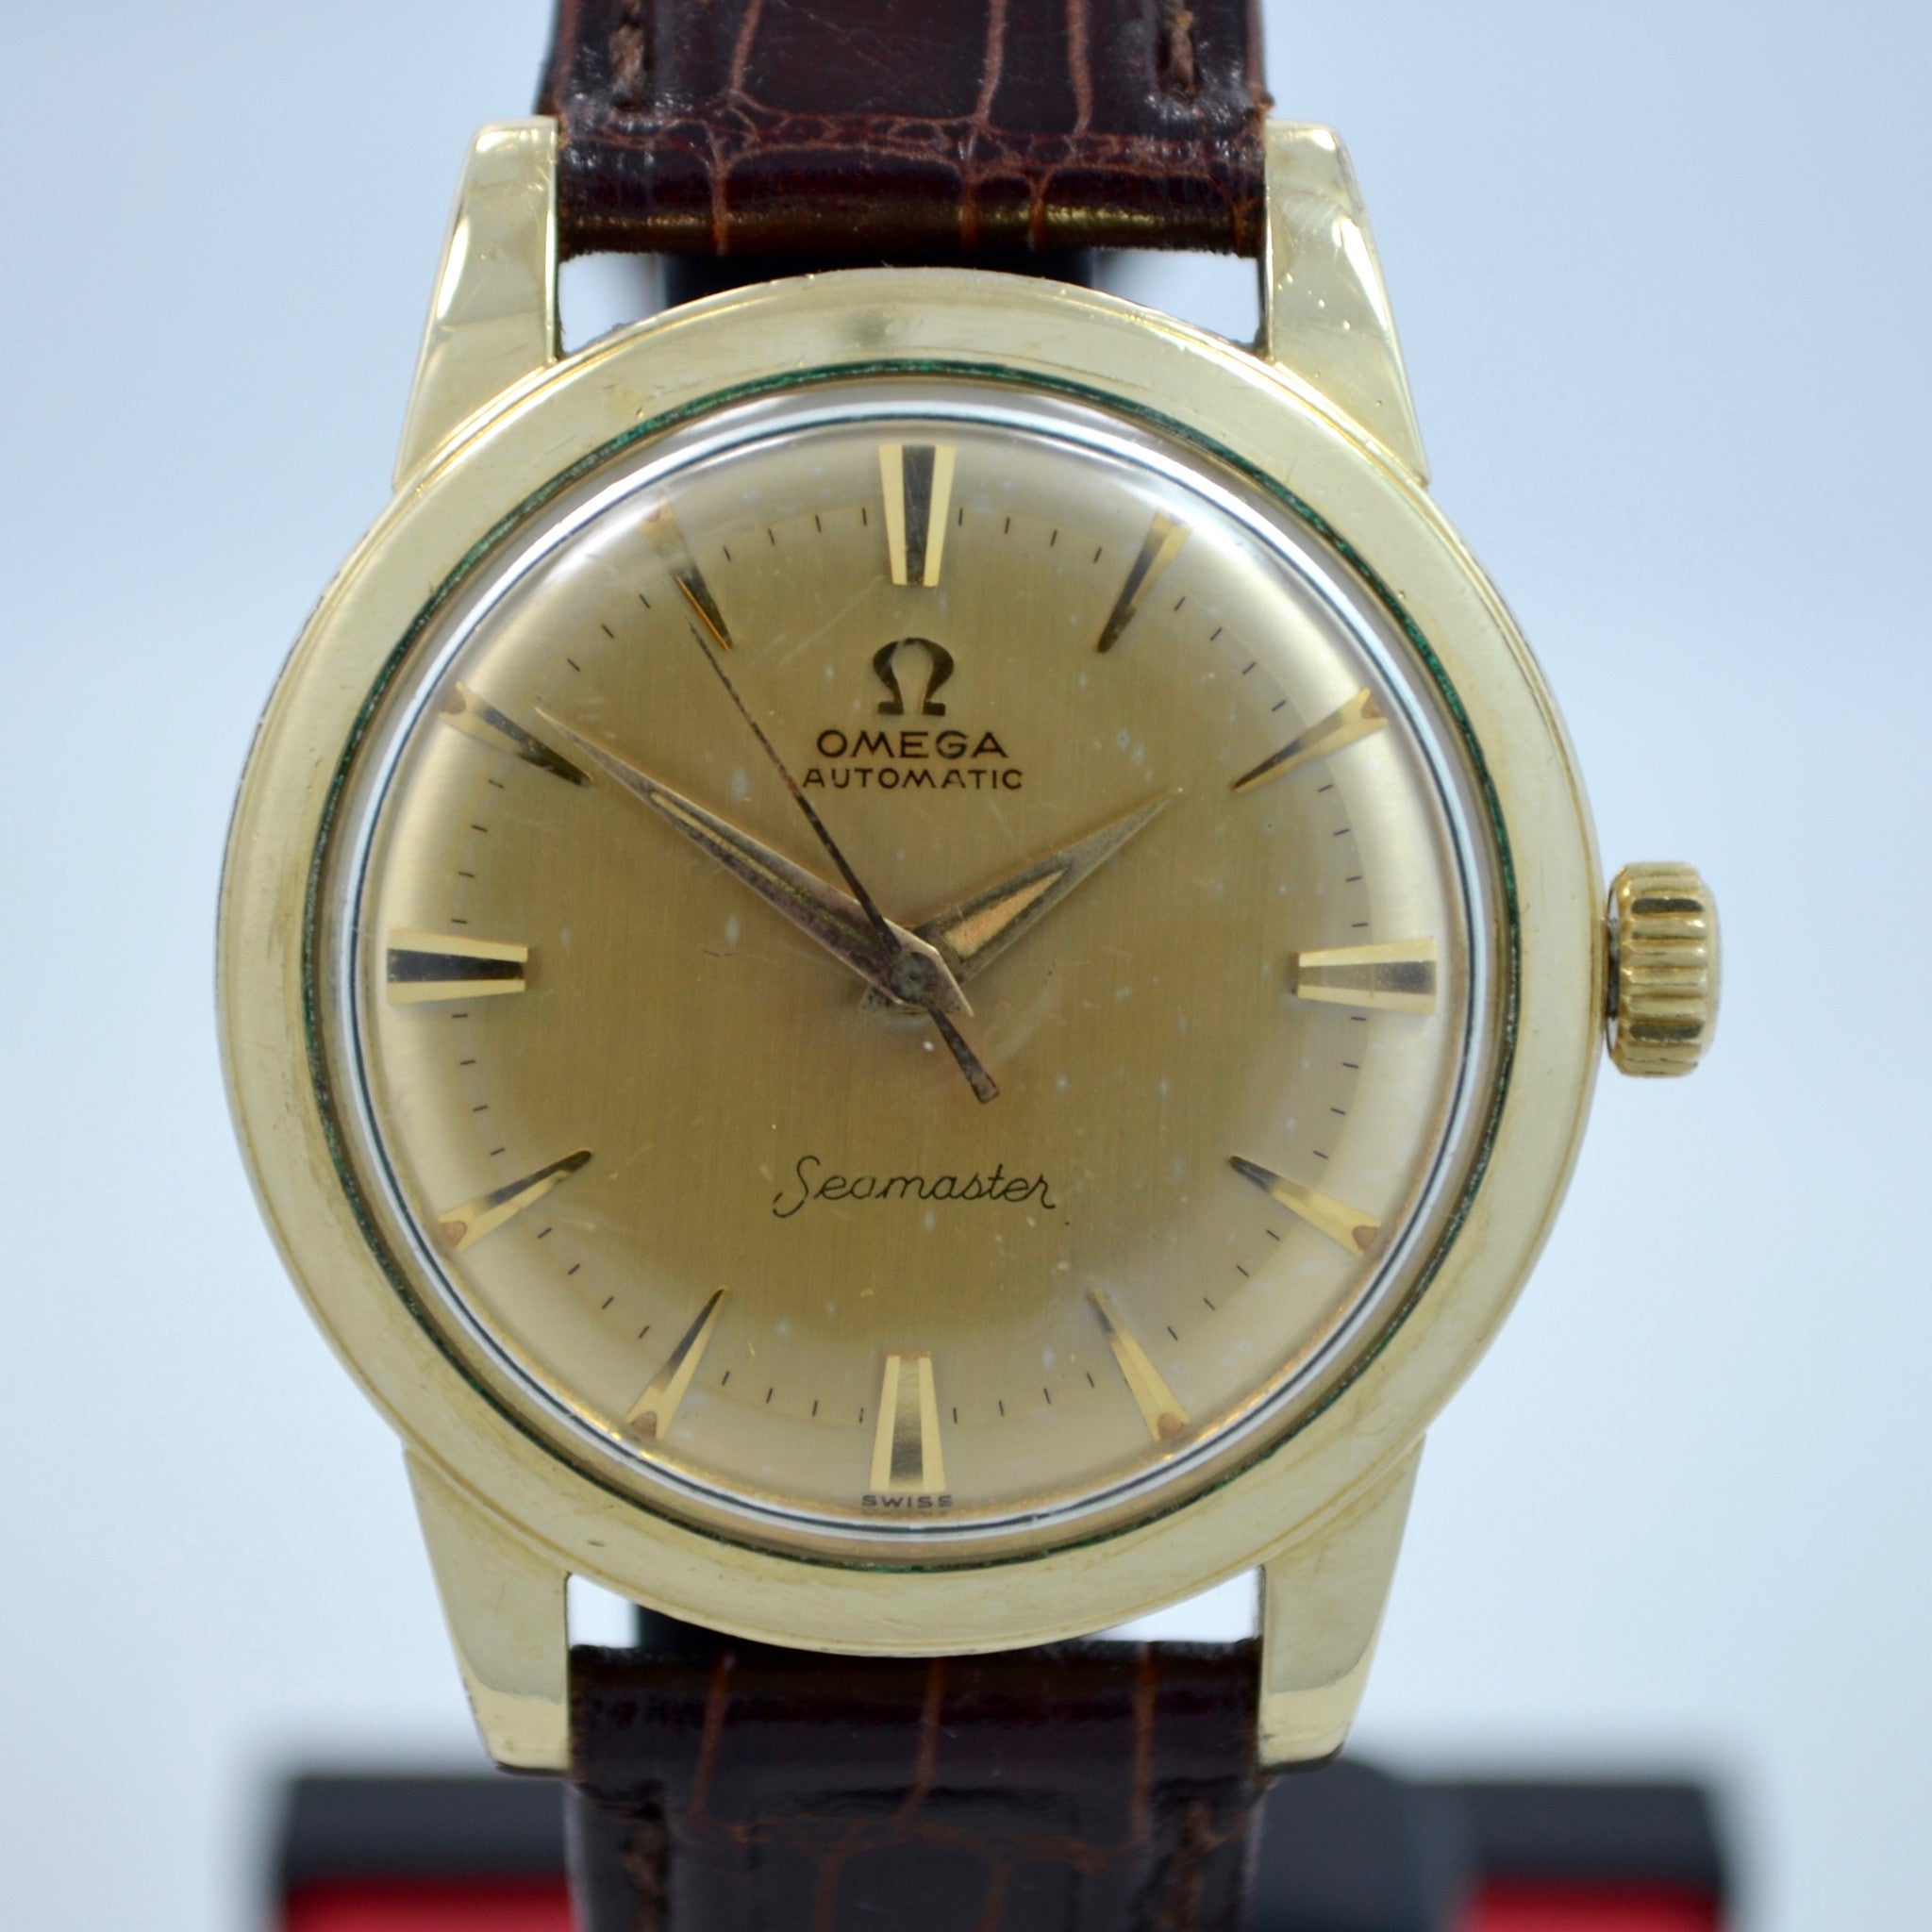 Vintage Omega Seamaster 6250 Gold Filled Automatic Cal. 500 Wristwatch